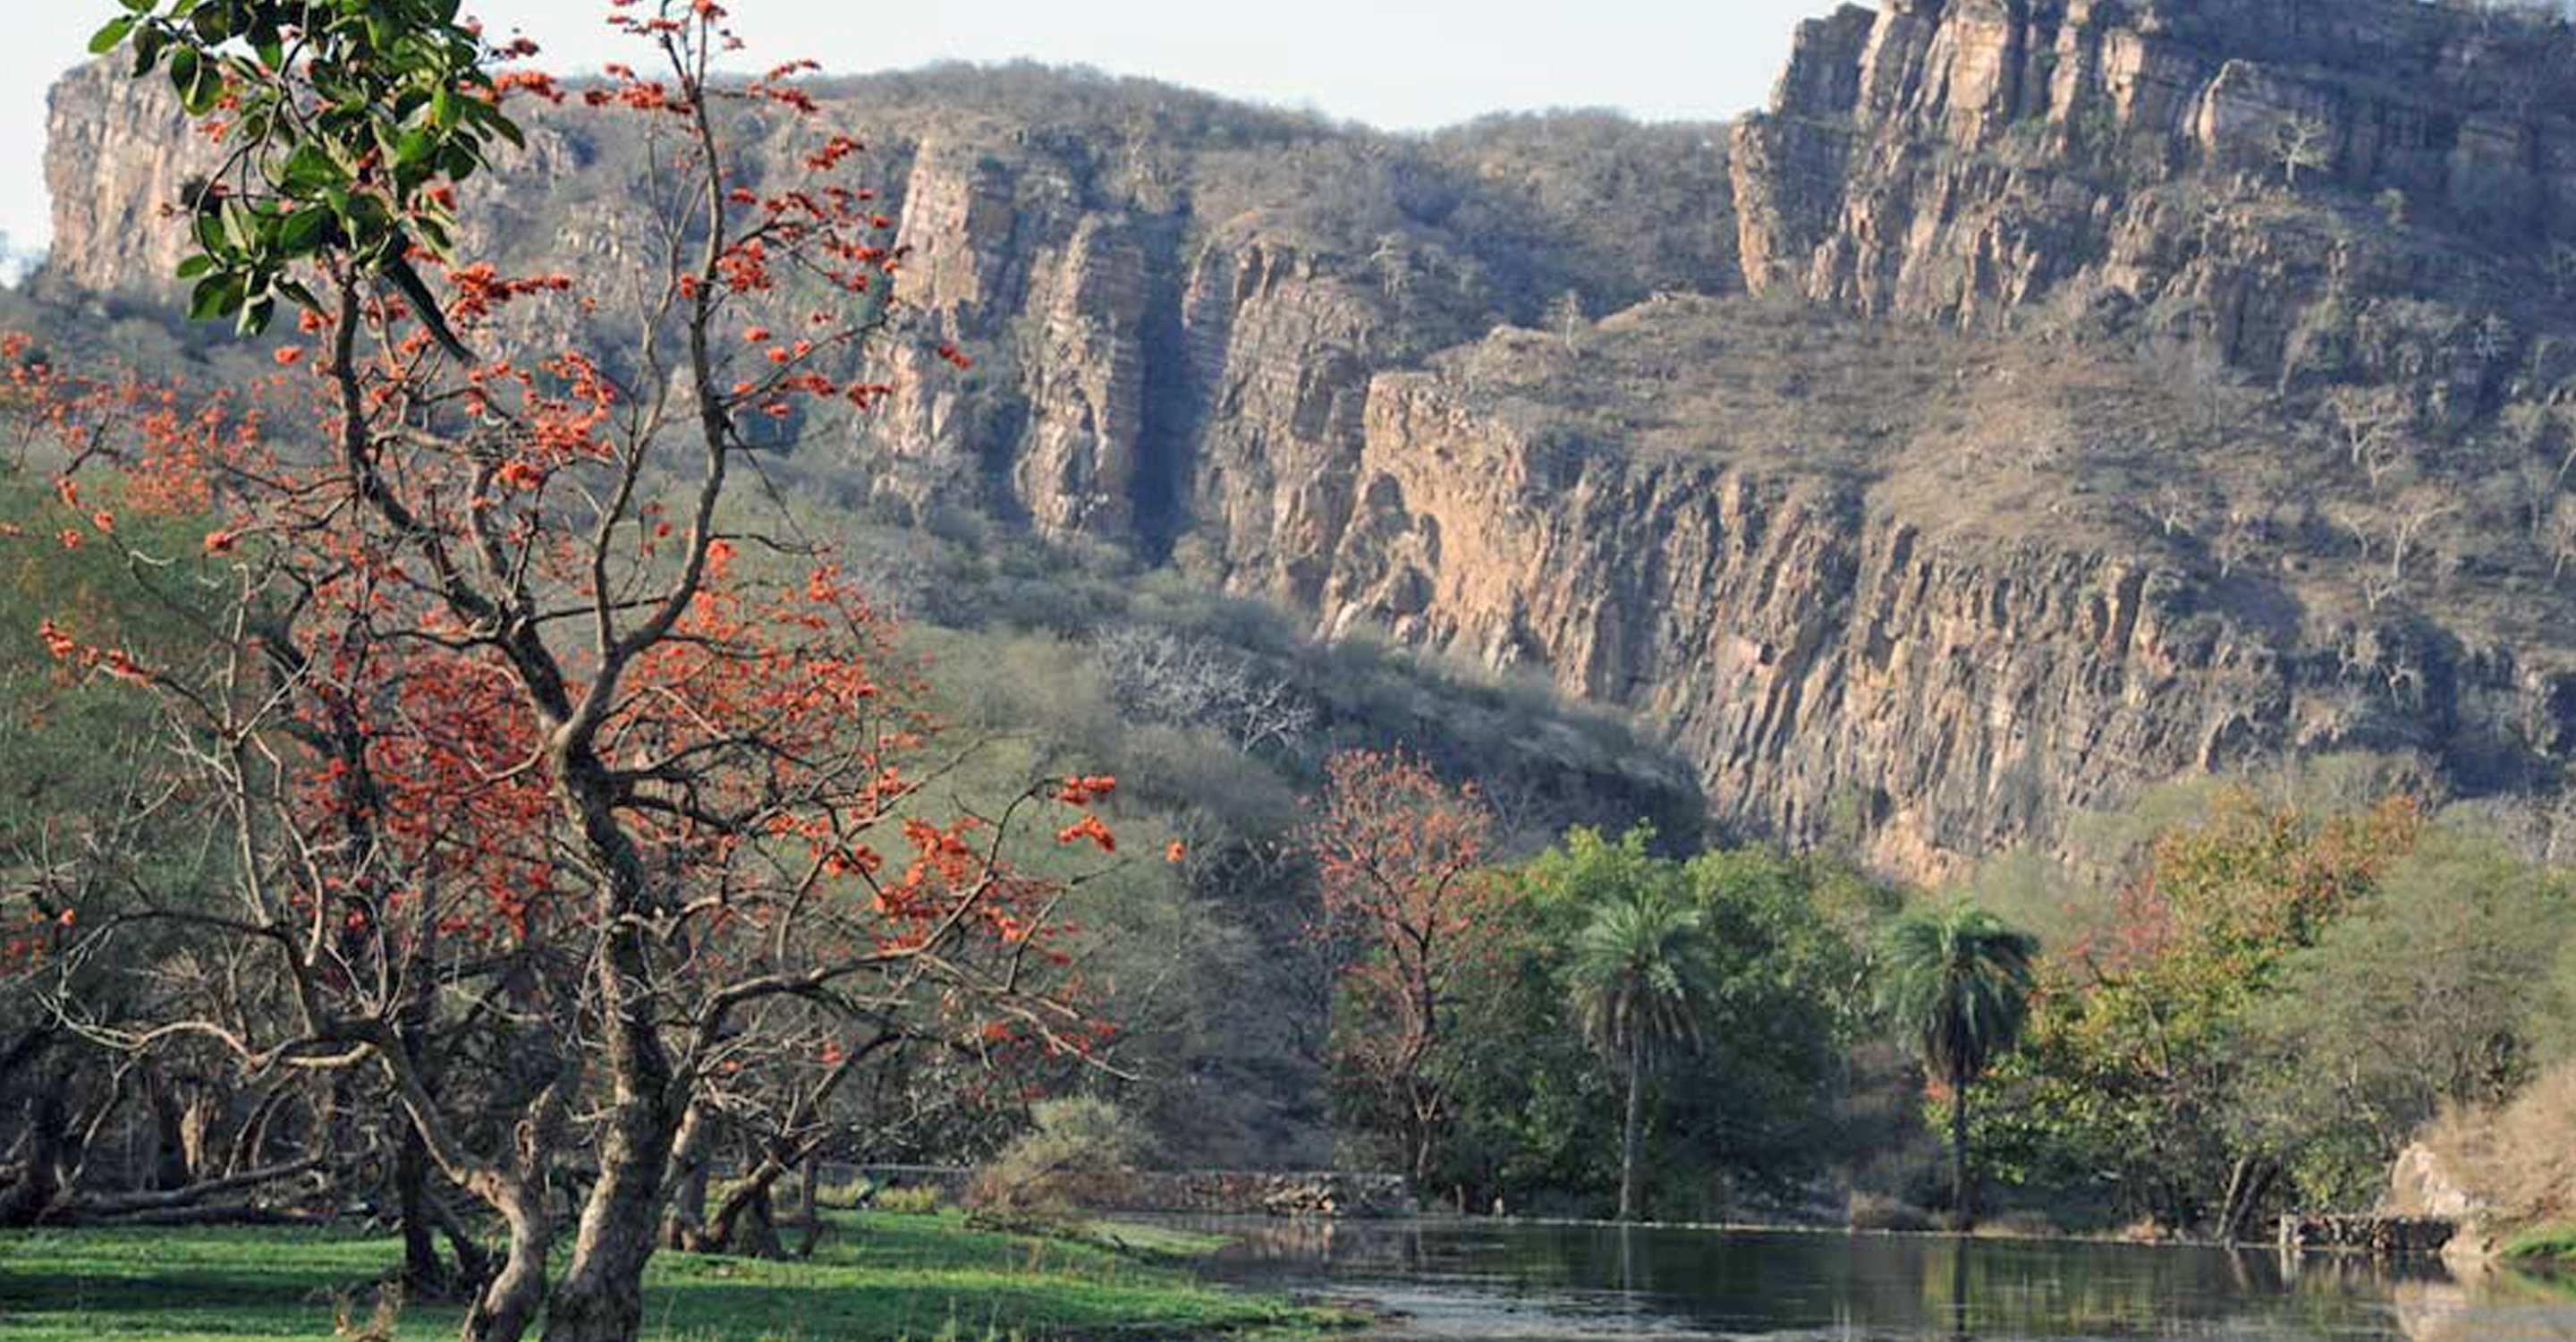 Rocky cliff and a lake in Ranthambore National Park, India